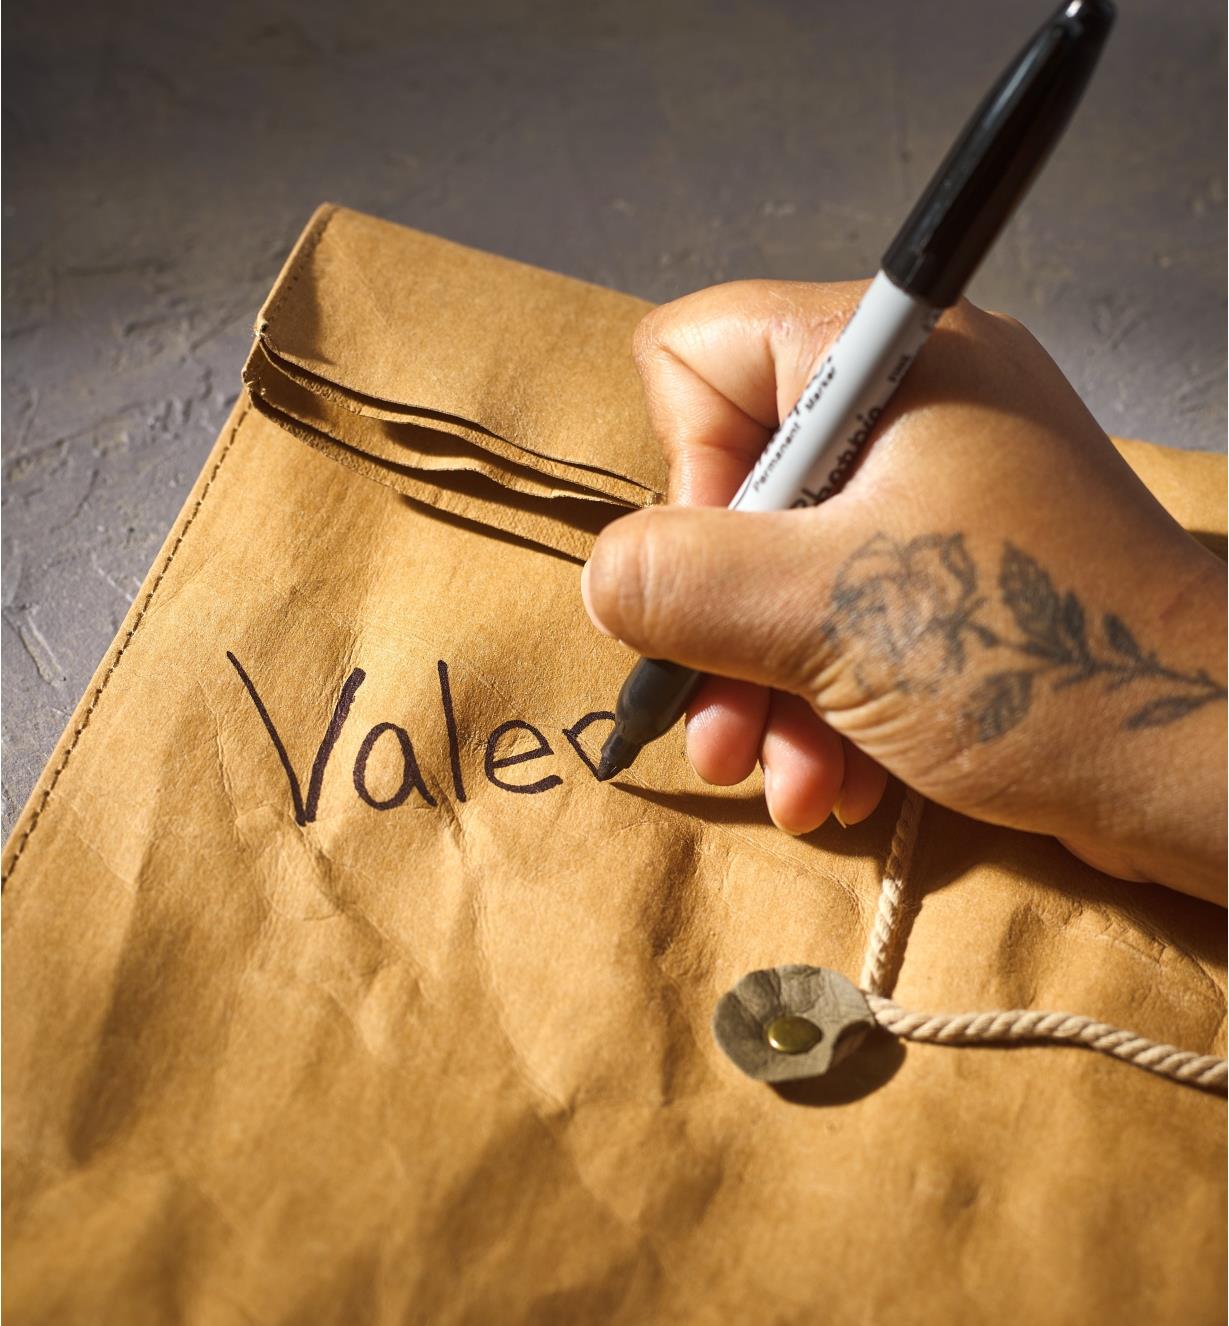 Using a marker to write a name on the tree leather lunch bag